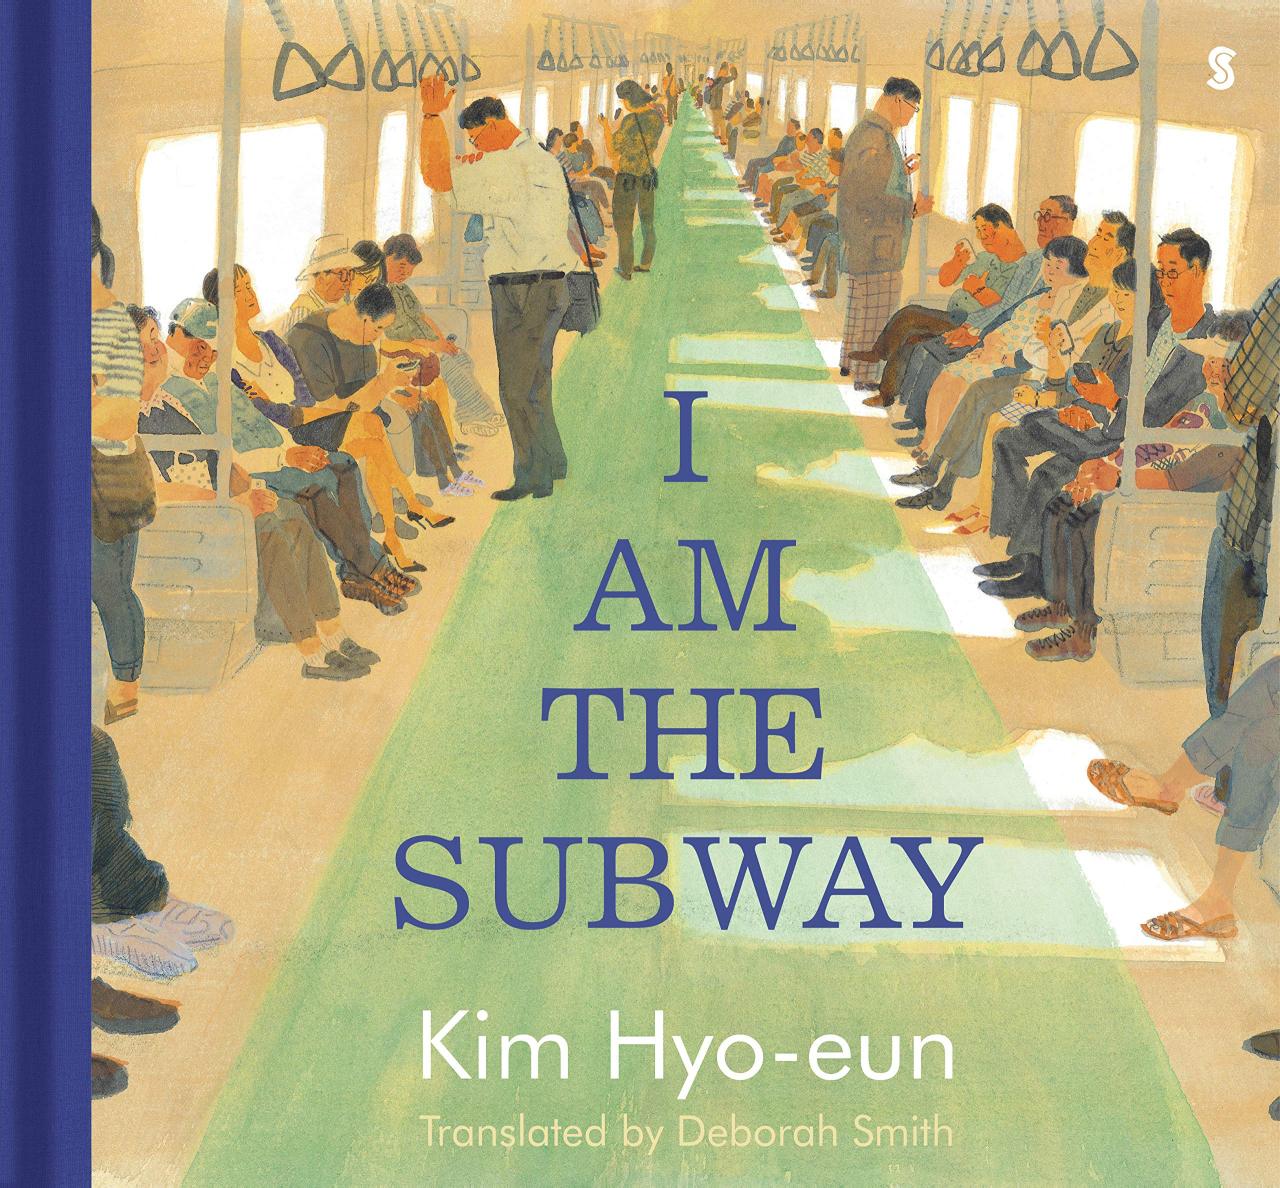 Cover of the English edition of “I am the Subway” (Scribble)